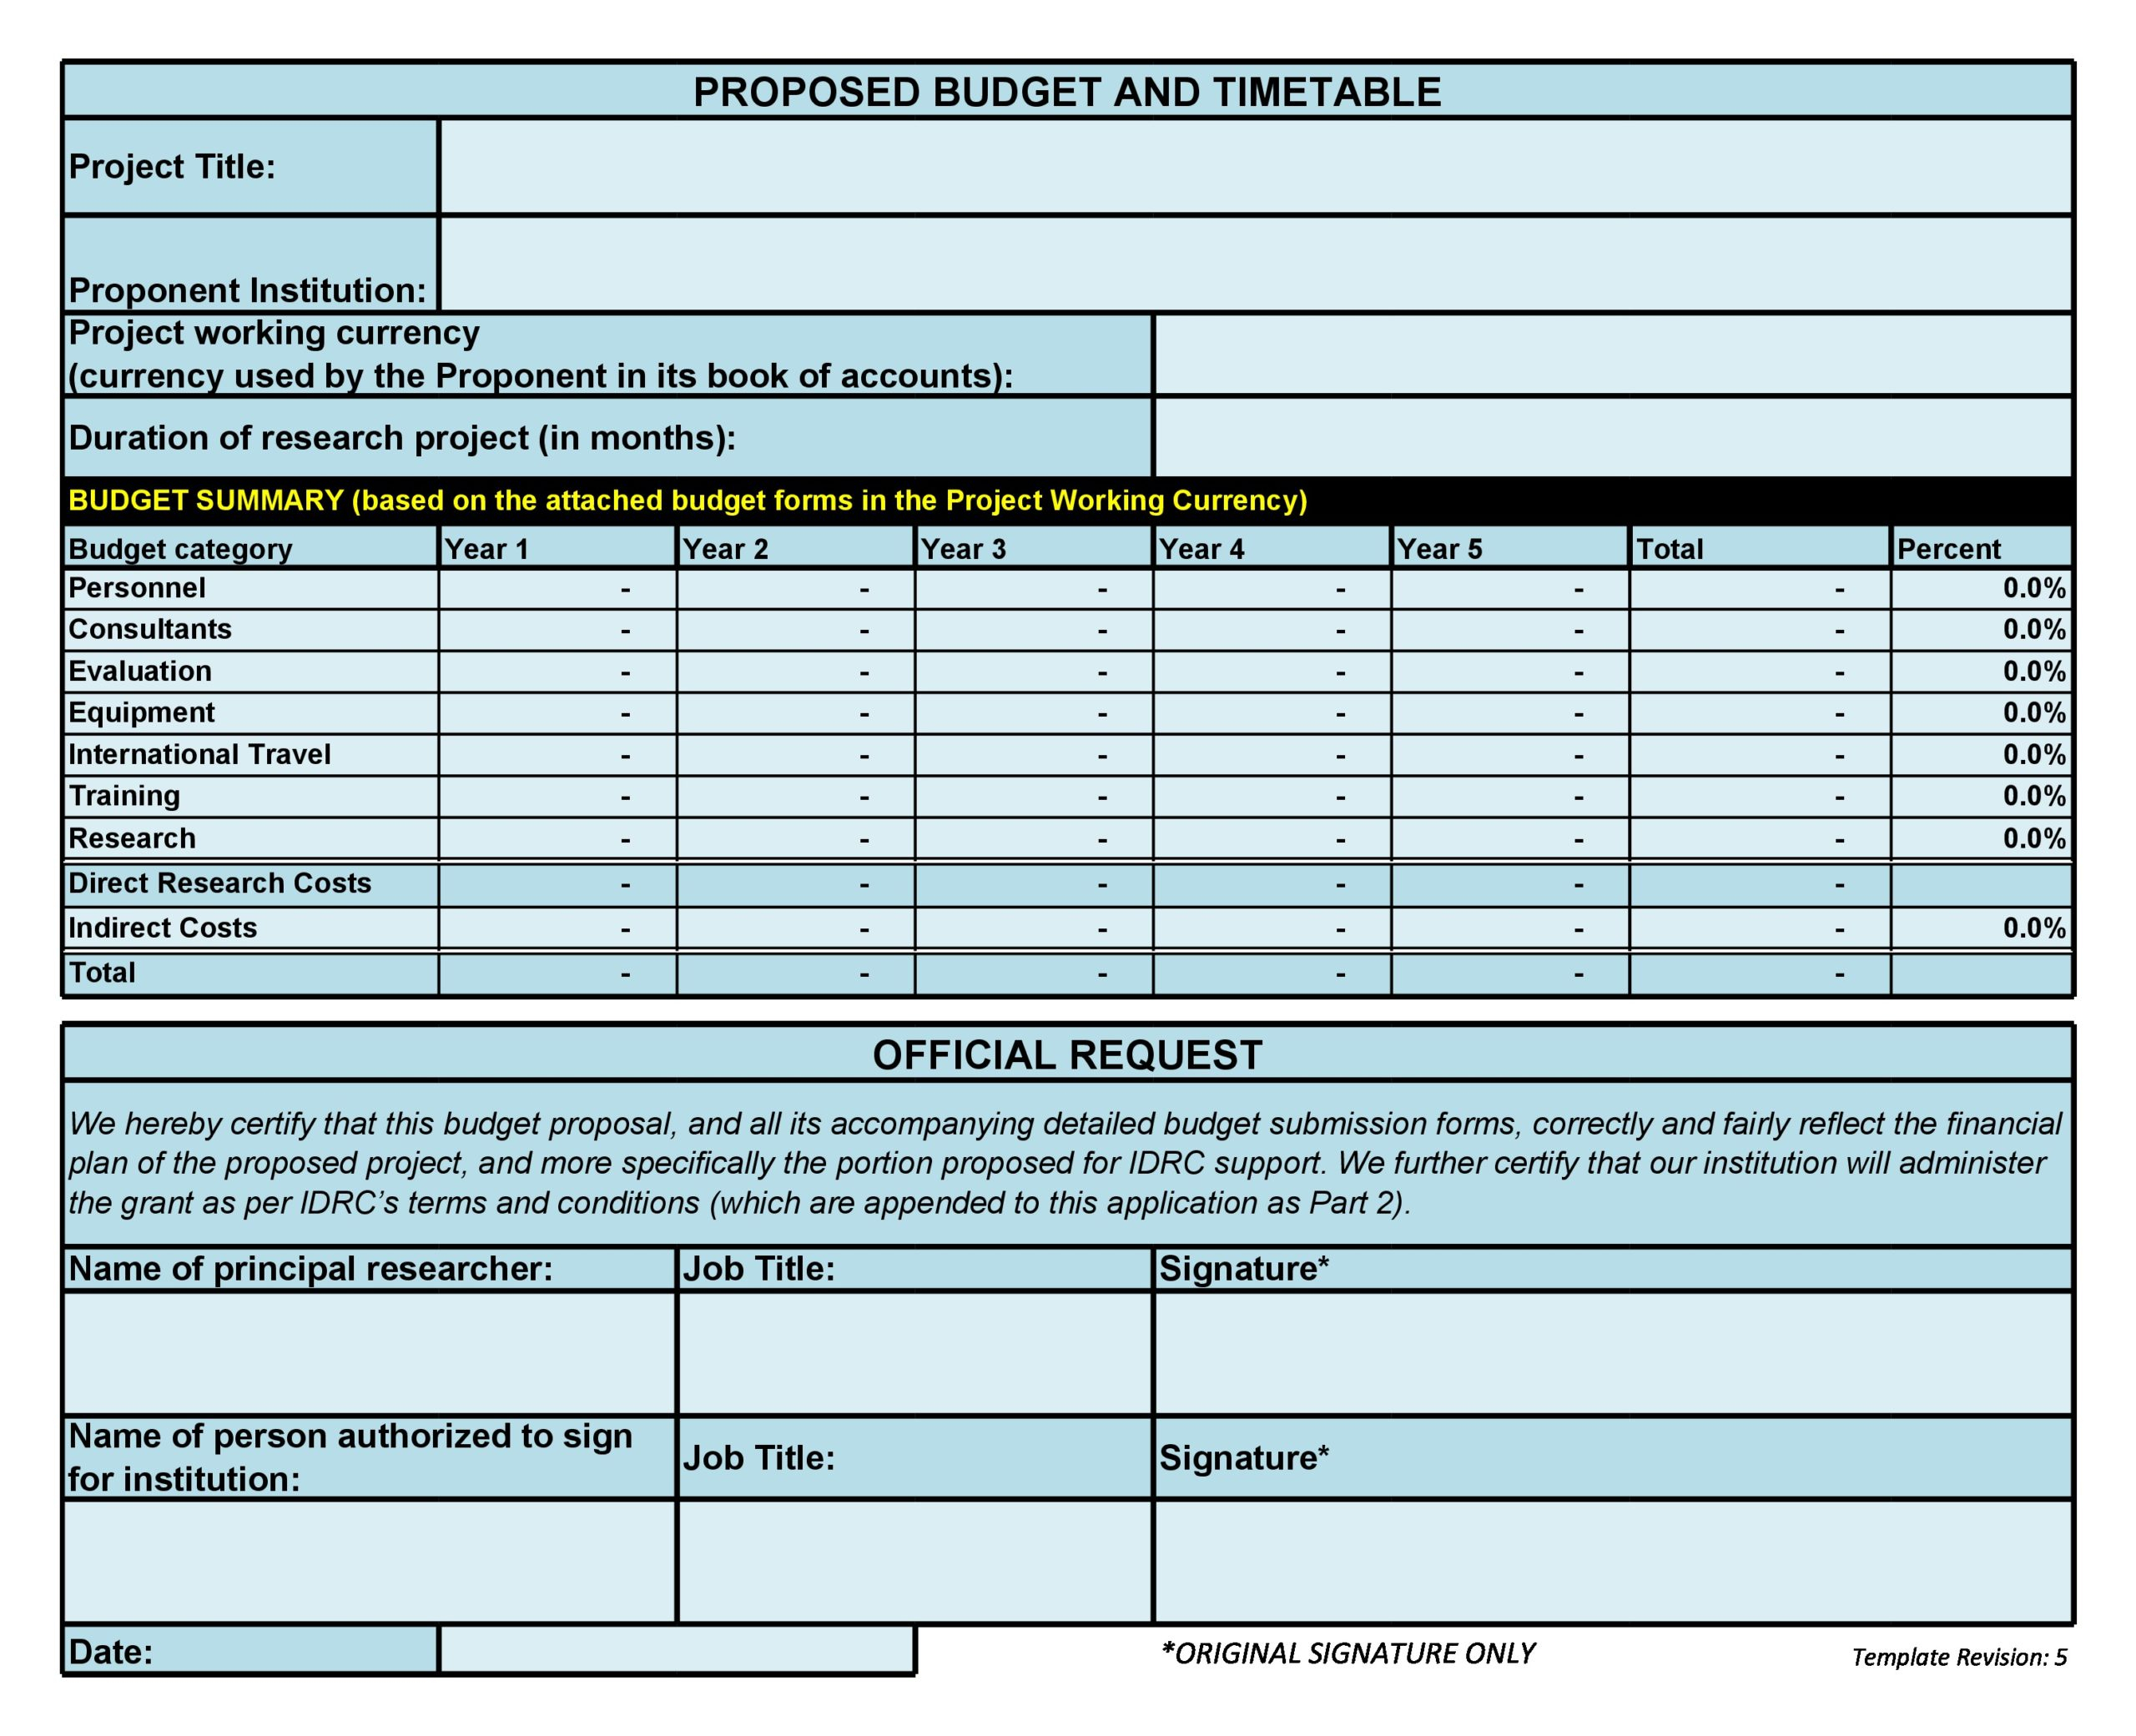 11 Free Budget Proposal Templates (Word & Excel) ᐅ TemplateLab In Self Direction Budget Template With Regard To Self Direction Budget Template